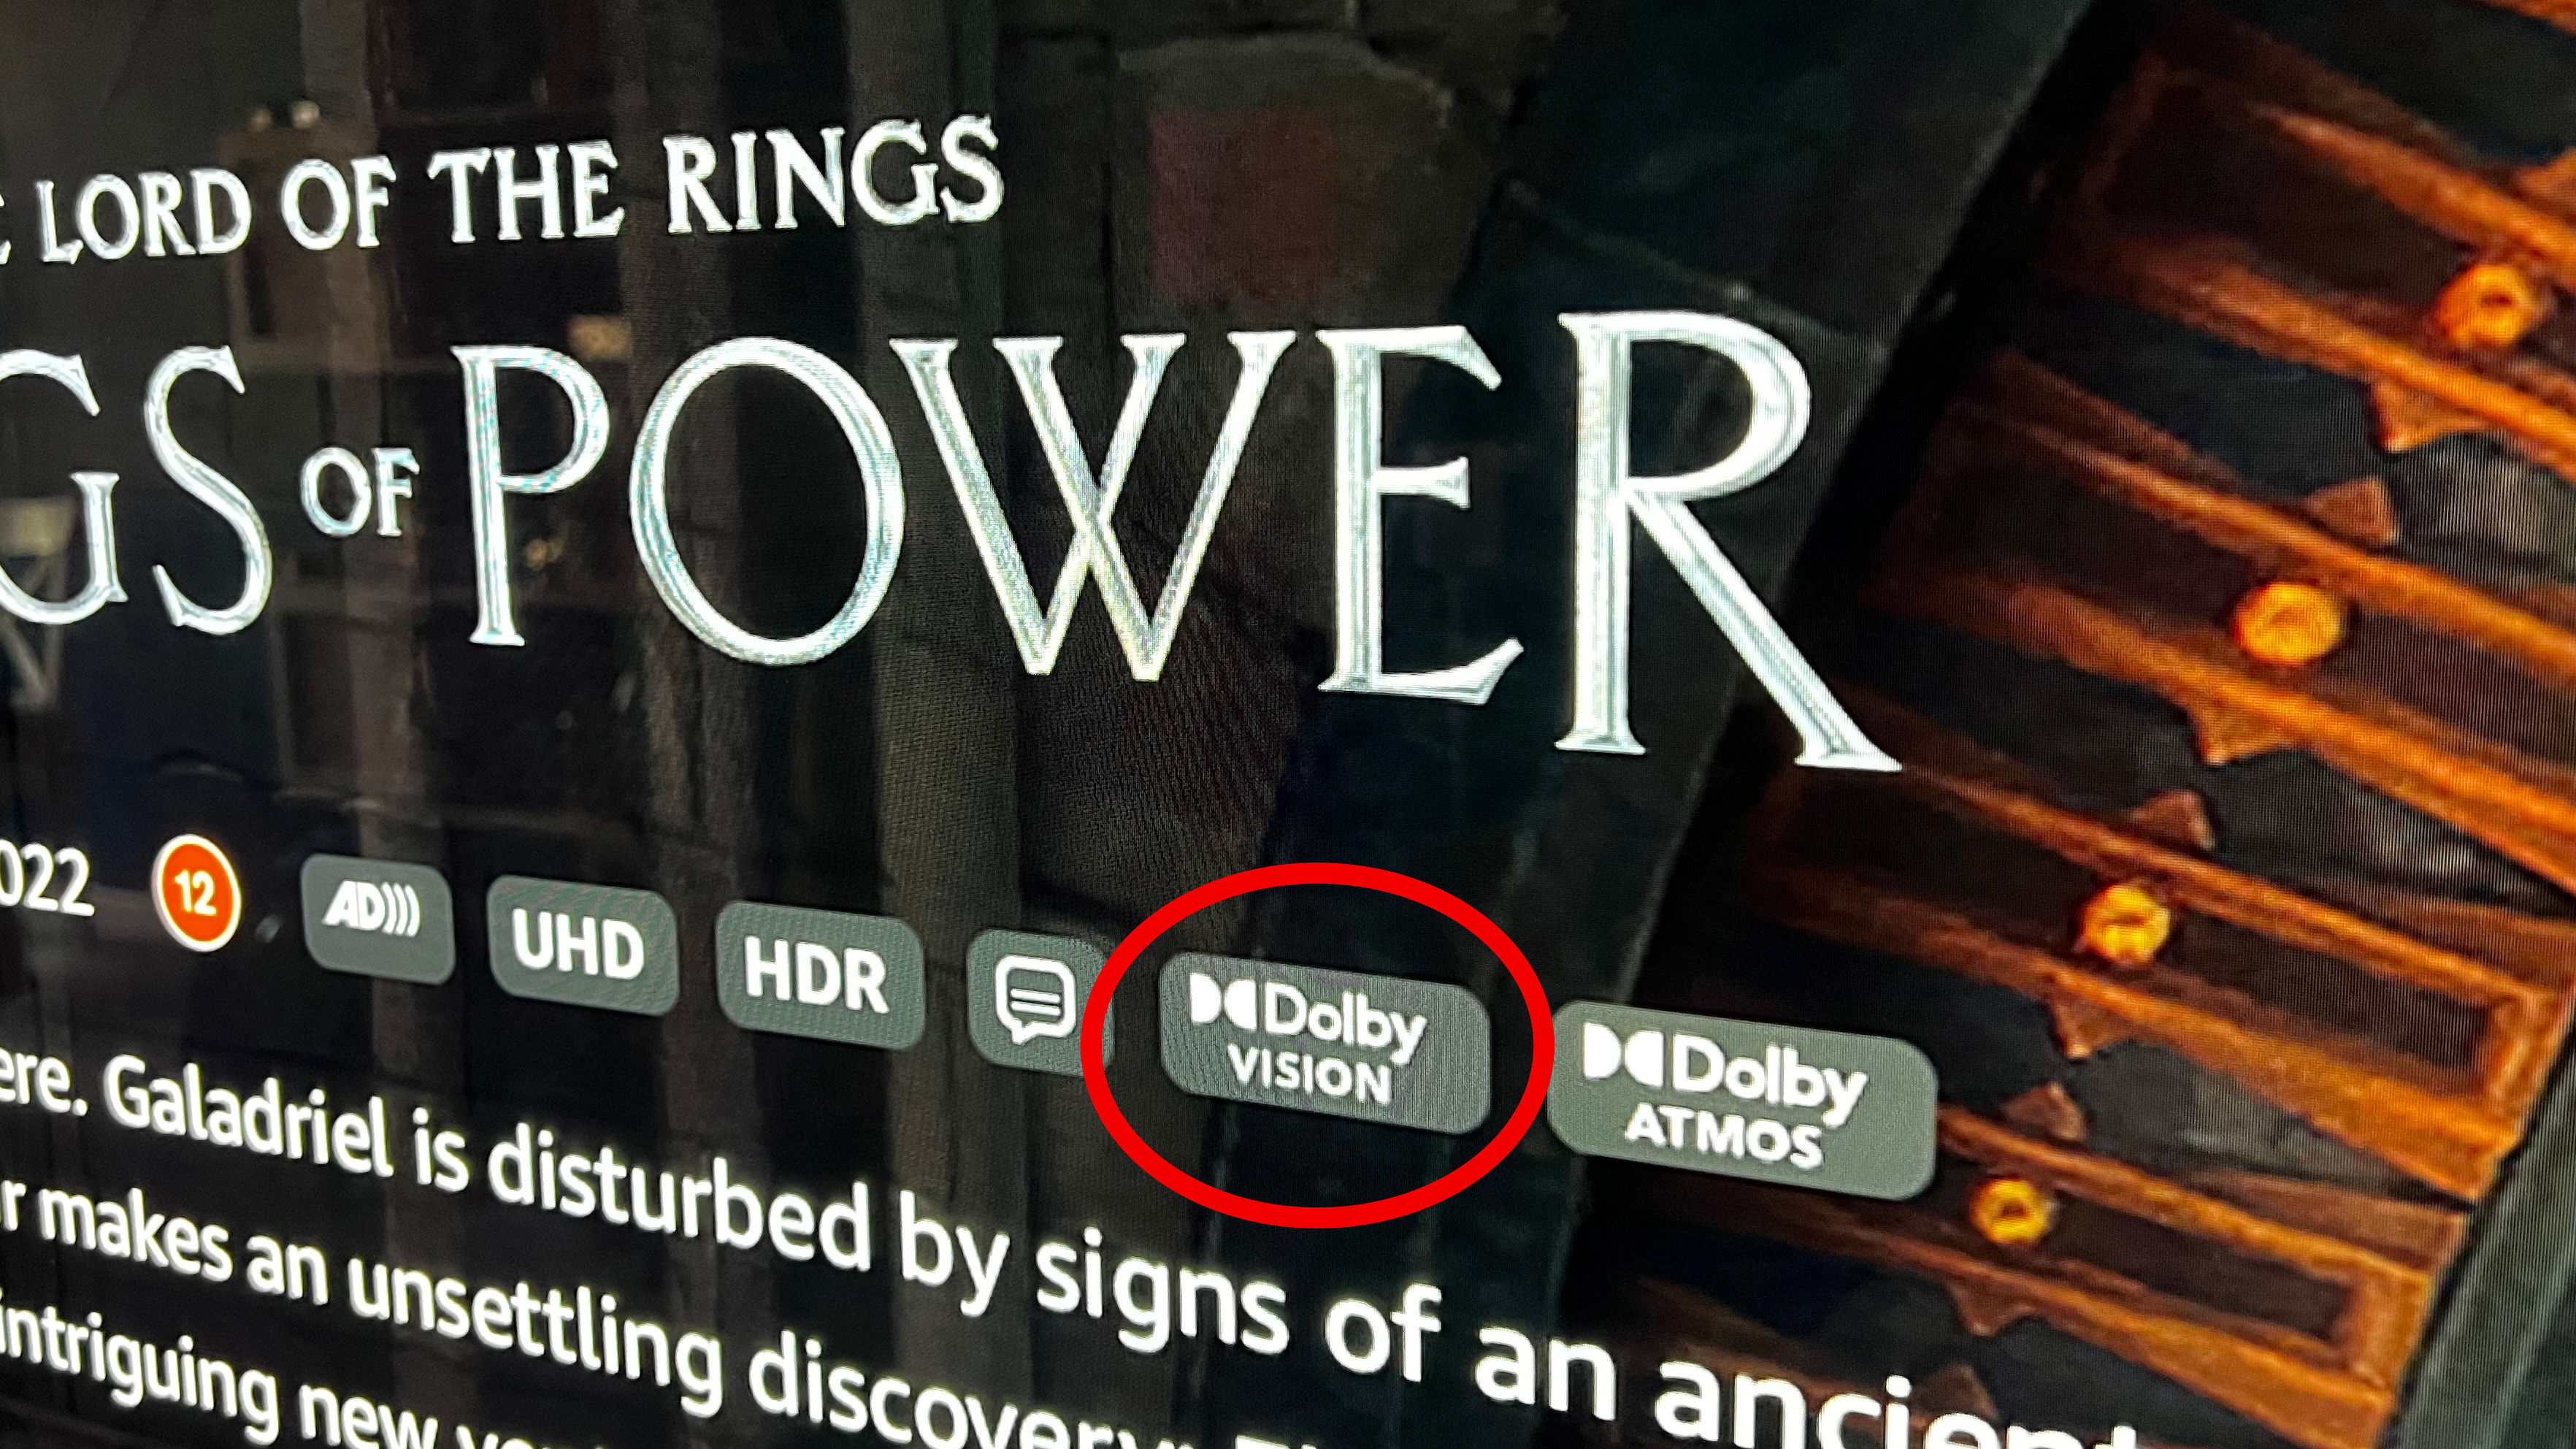 Image showing Dolby Vision content playing on a TV